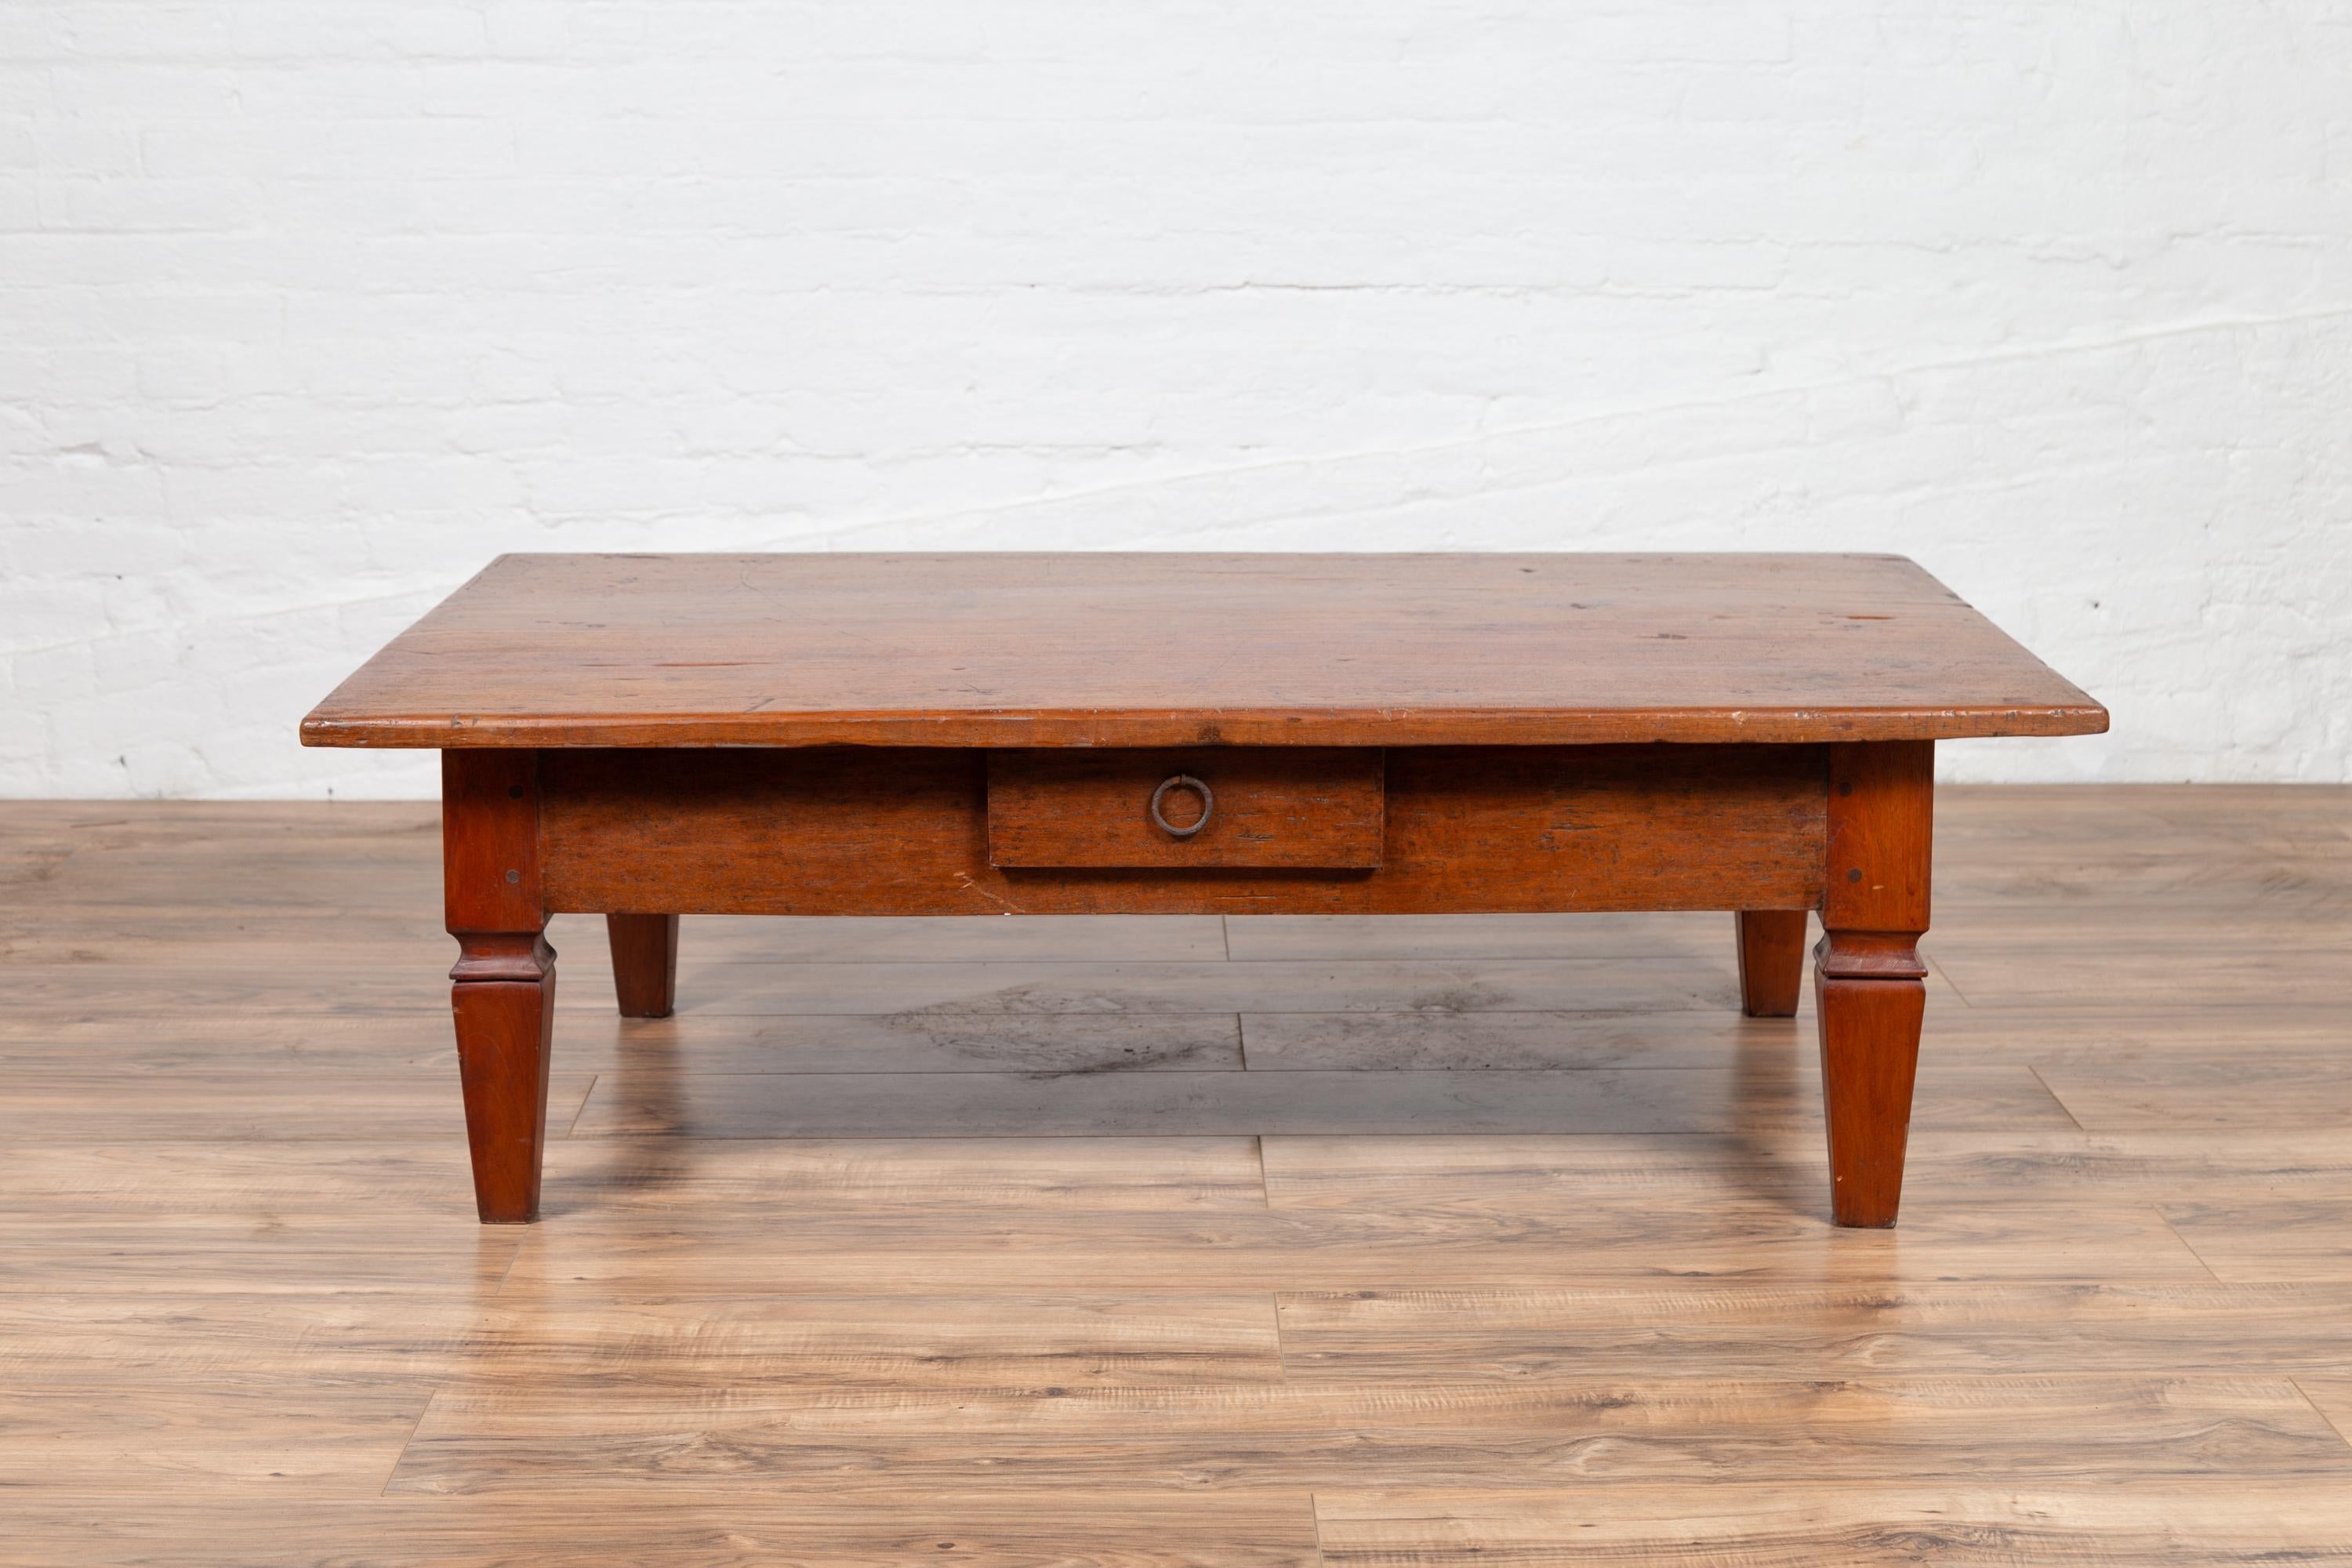 An antique Indonesian wooden coffee table from the early 20th century, with single drawer and tapered legs. Born on the island of Java during the early years of the 20th century, this charming coffee table features a rectangular single plank top,